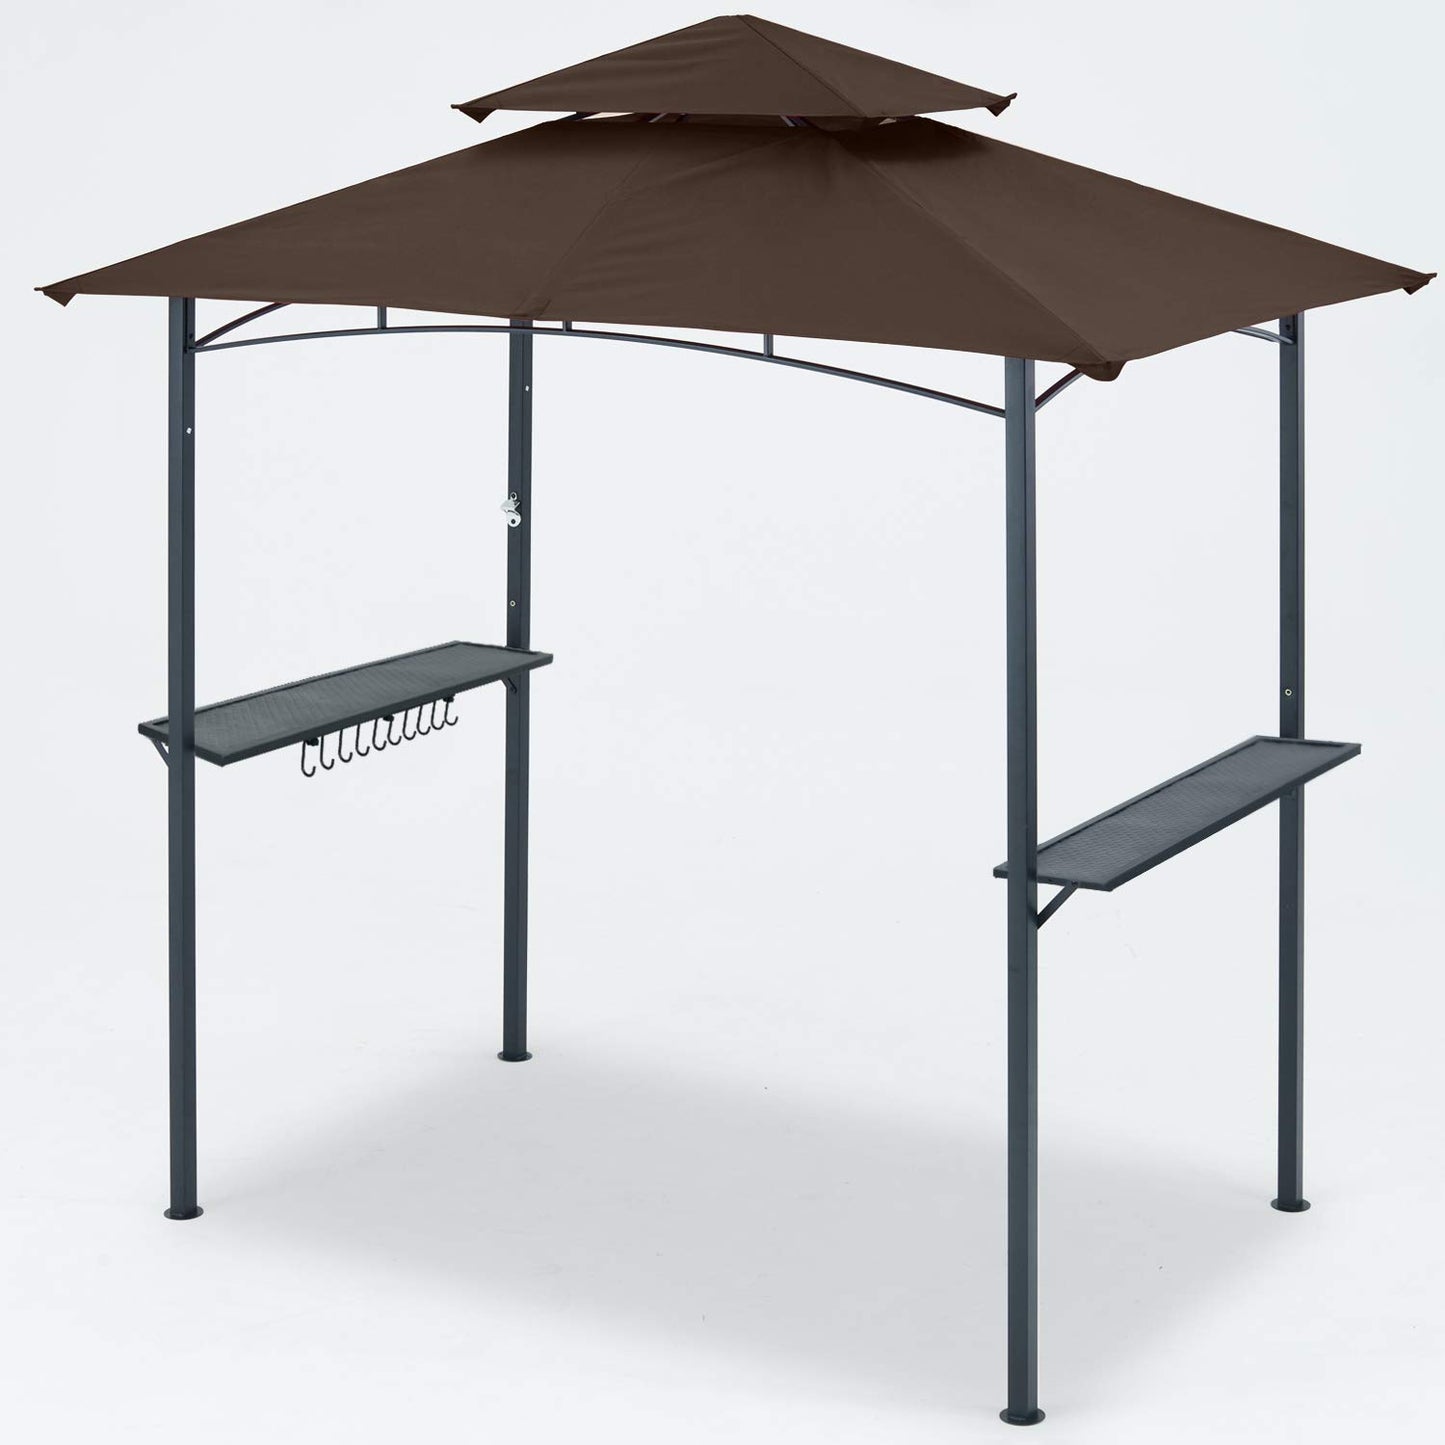 MASTERCANOPY 8 x 5 Grill Gazebo Outdoor BBQ Gazebo Canopy with 2 LED Lights (Brown)